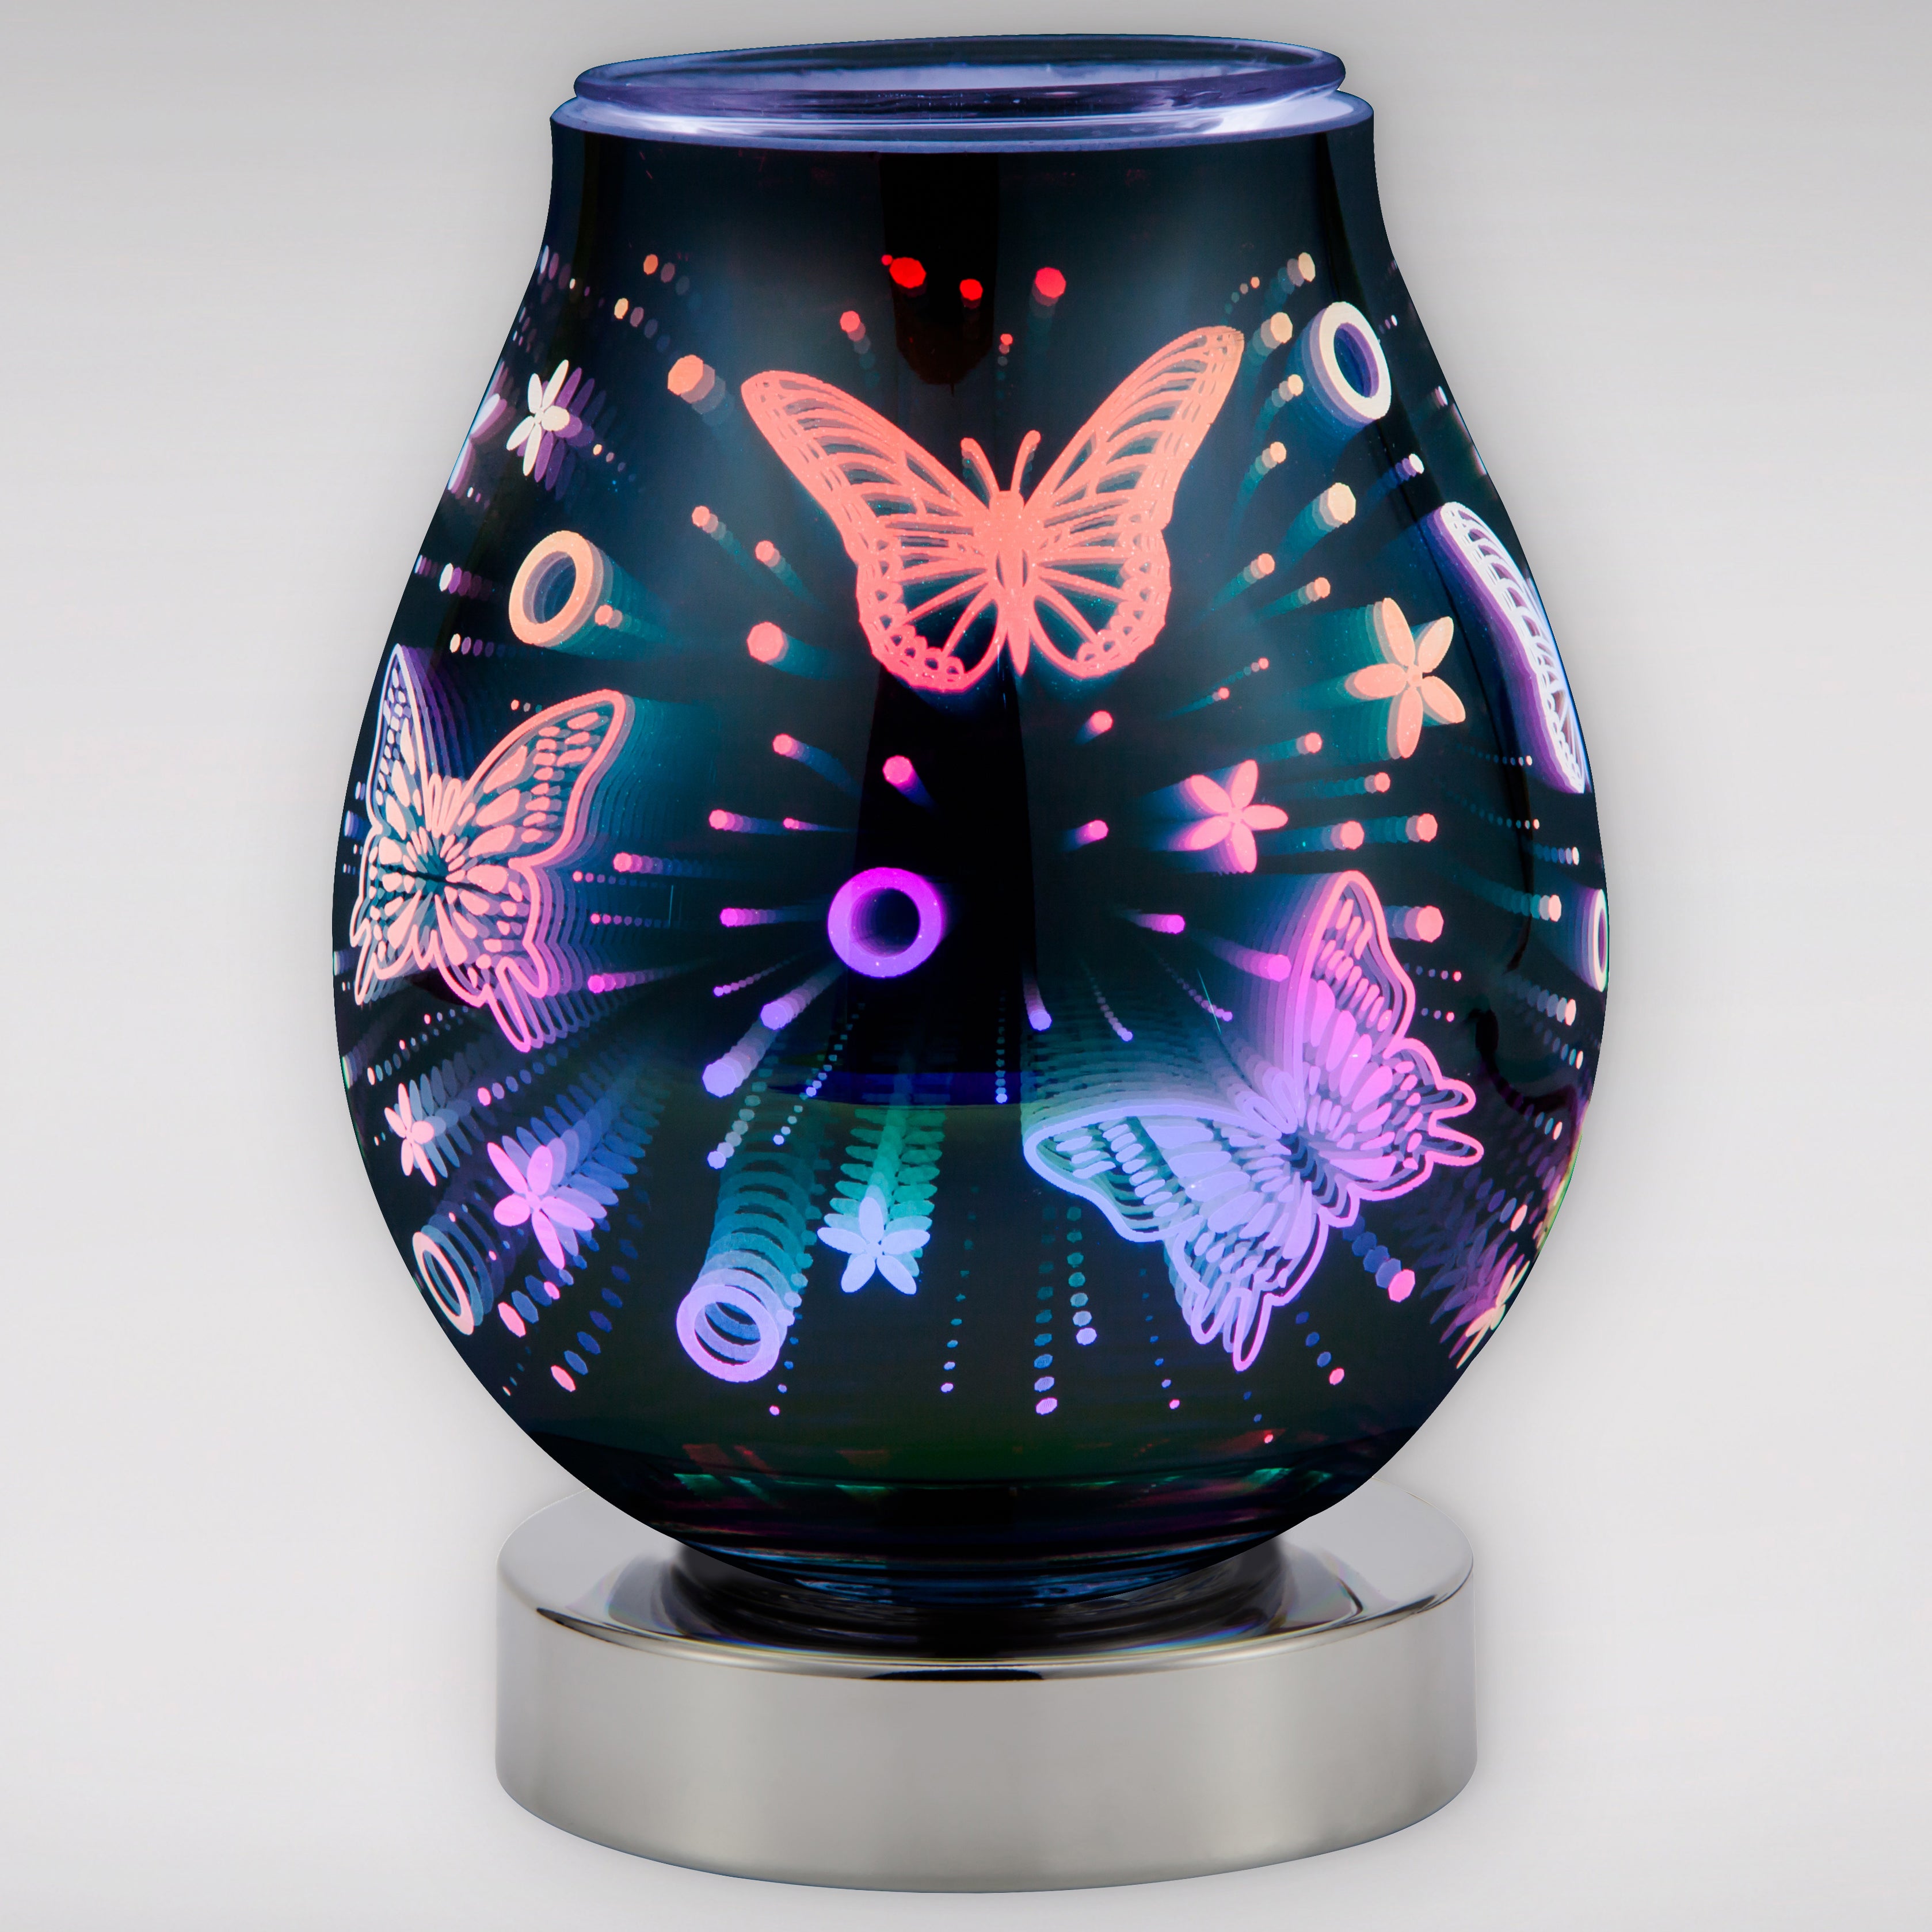 Scentchips Warmer 3D LED 'Butterflies' Colour Changing Display